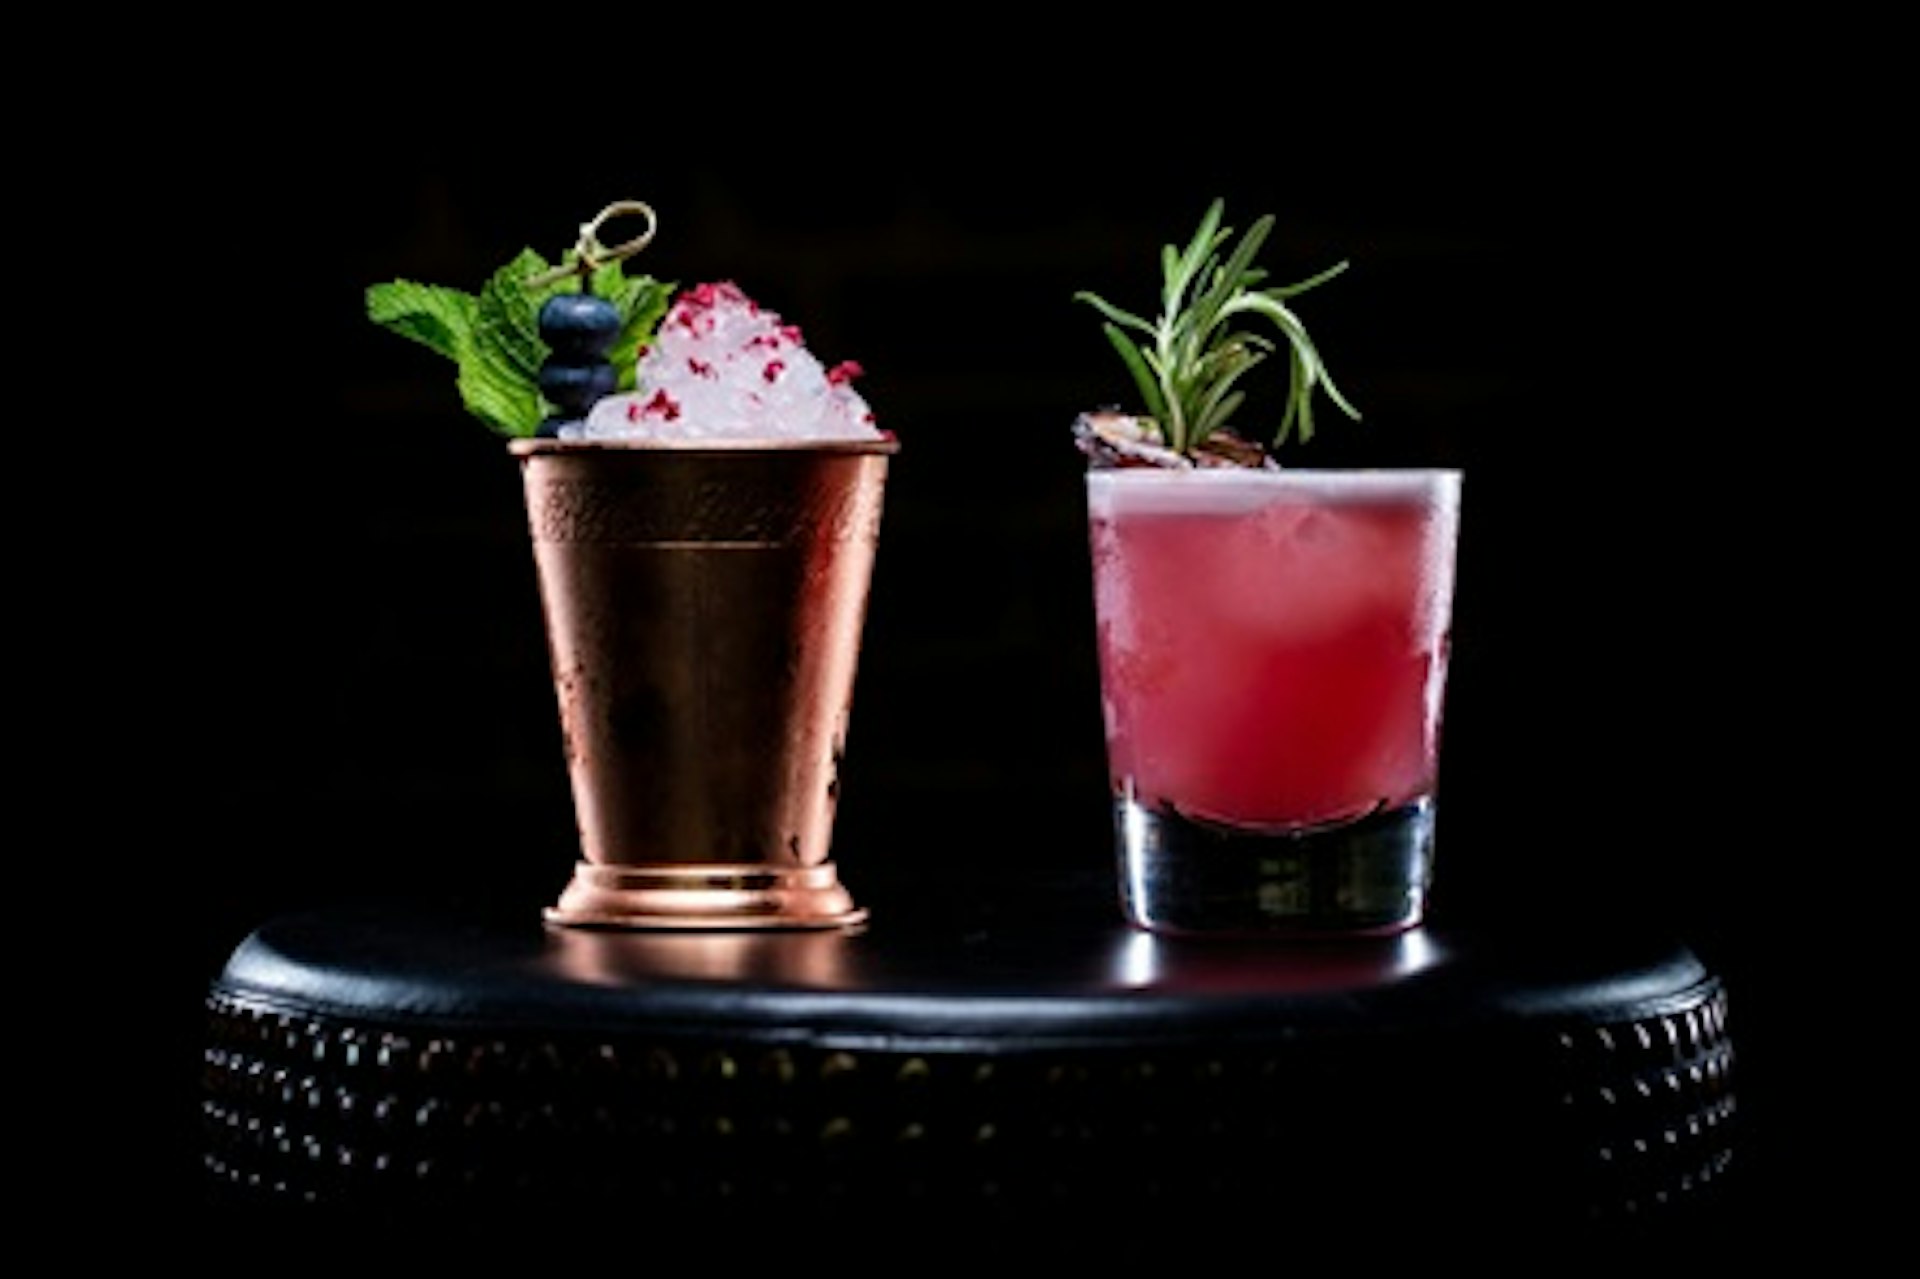 Bespoke Cocktail and Bar Snacks for Two at Old Bengal Bar 3